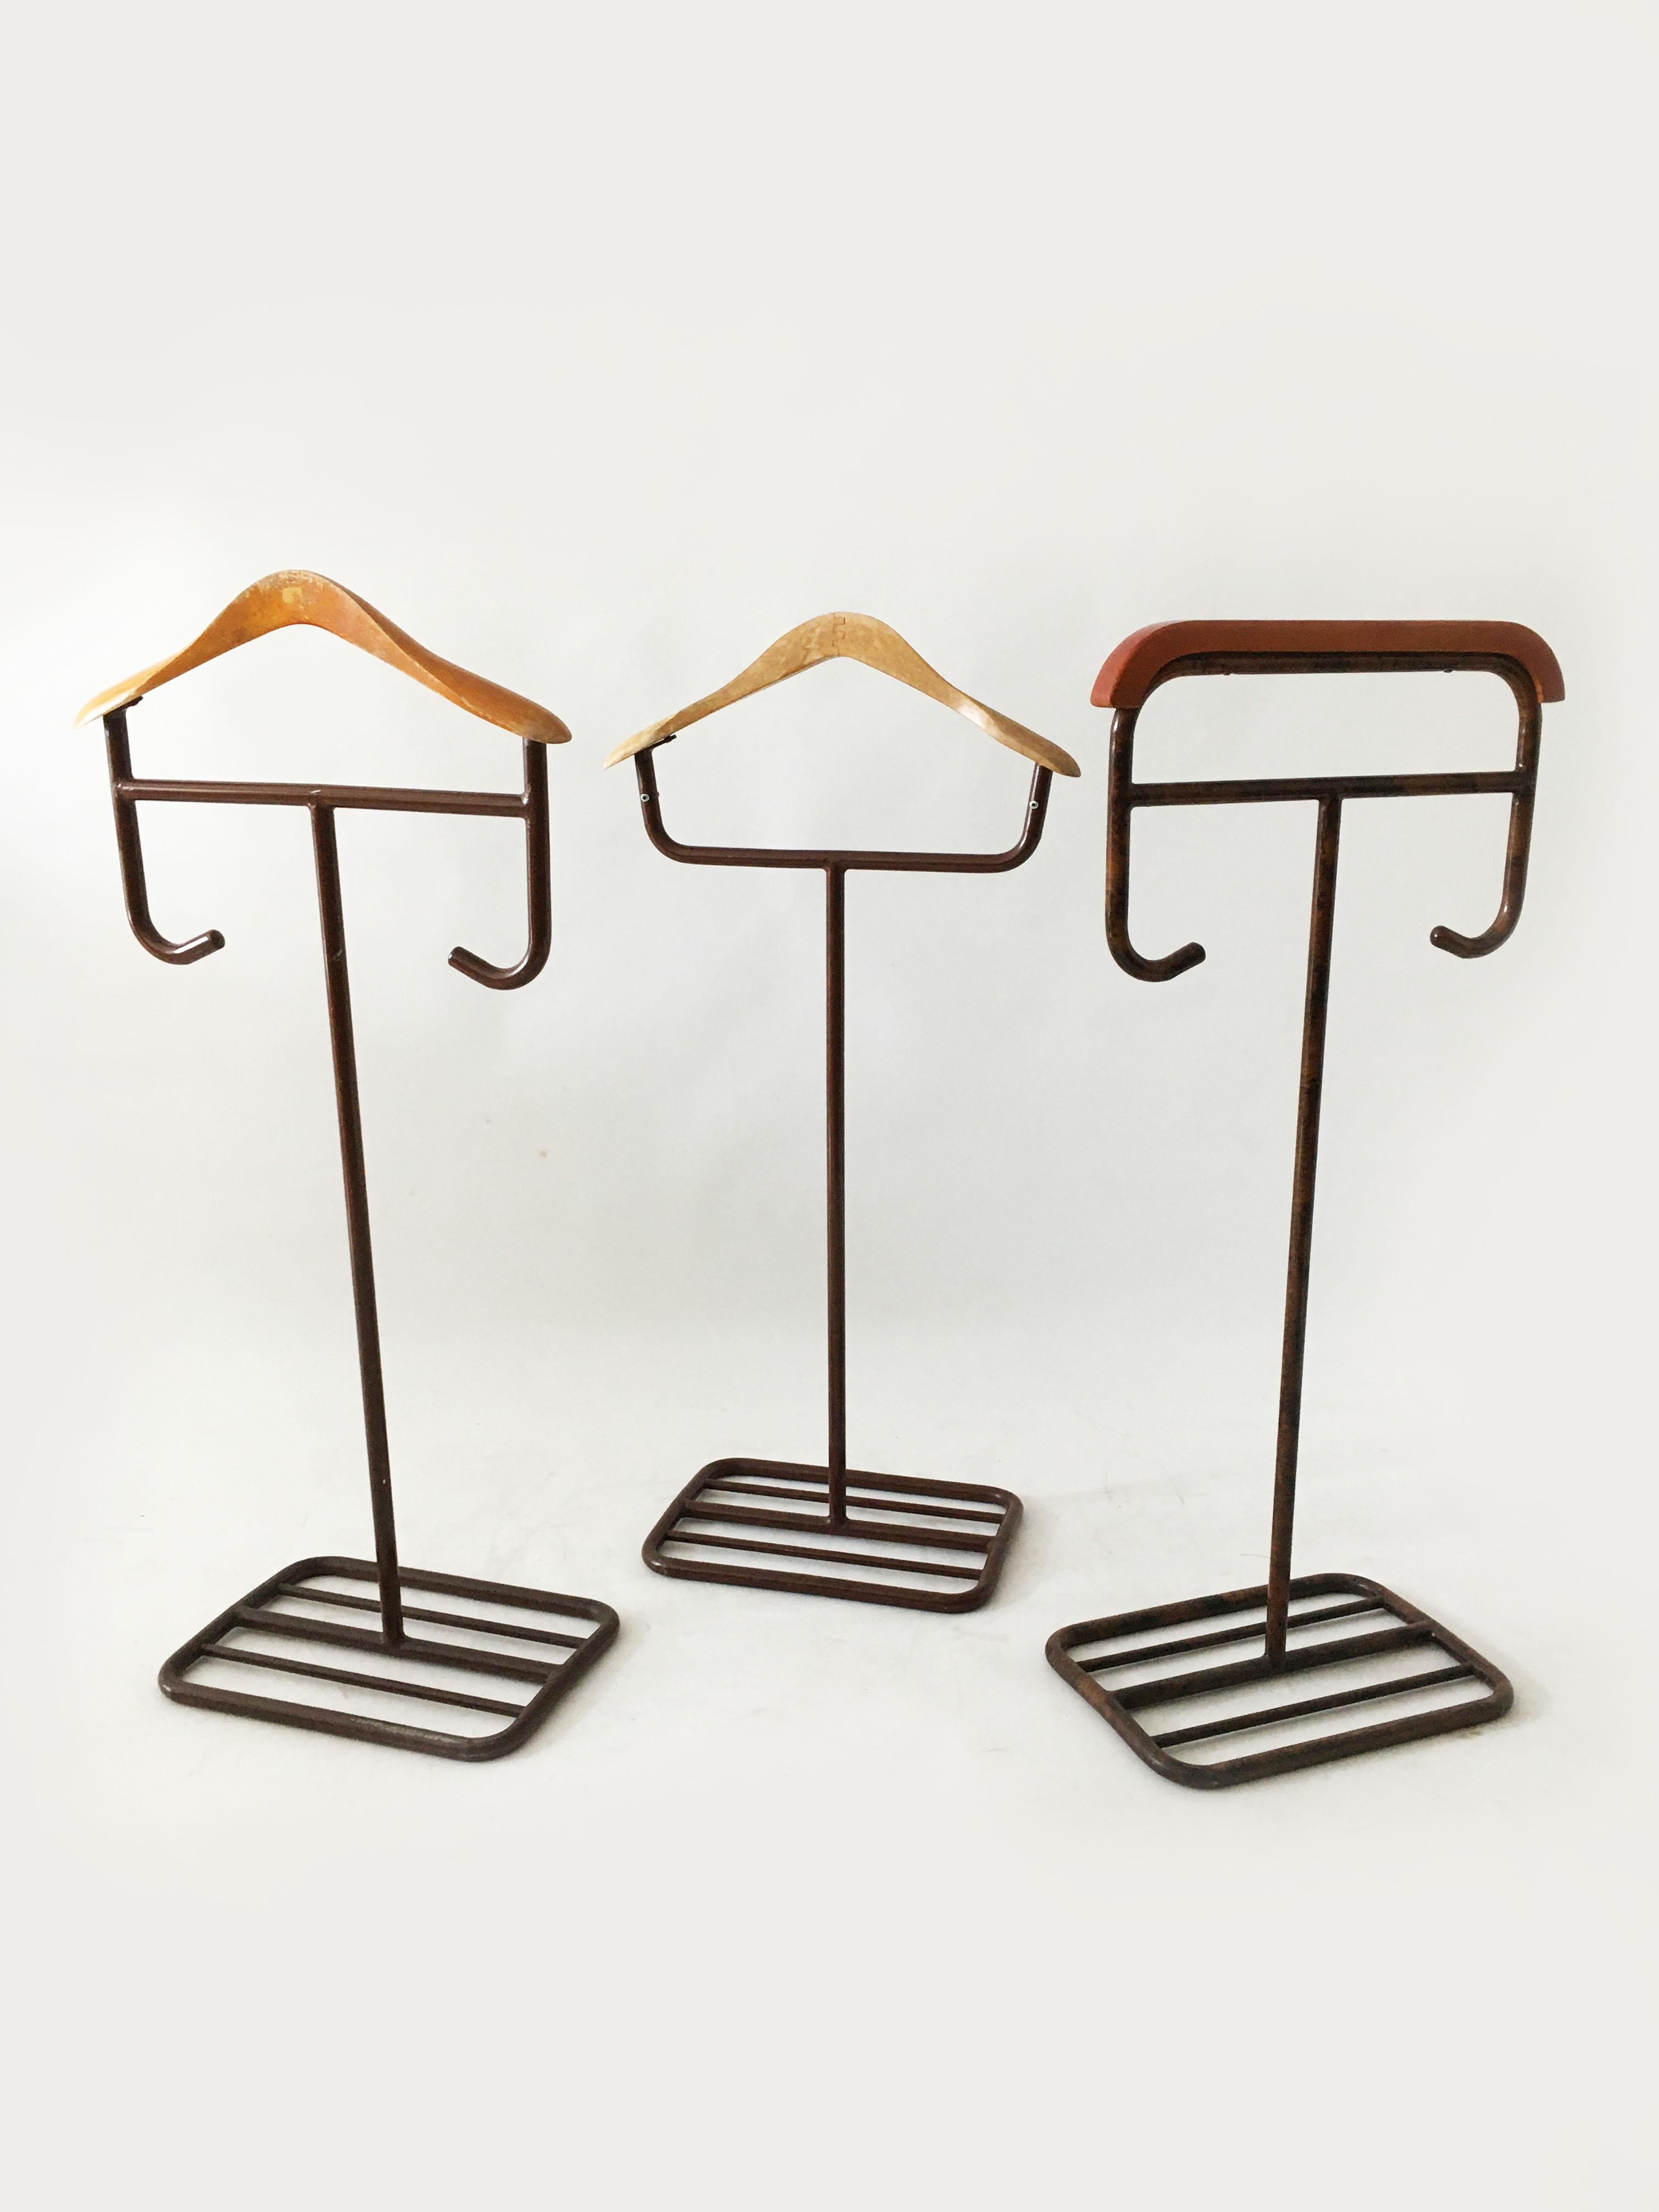 Bauhaus Valet Stand Group of Three Model No. I, II, III, Germany 1930s For Sale 6